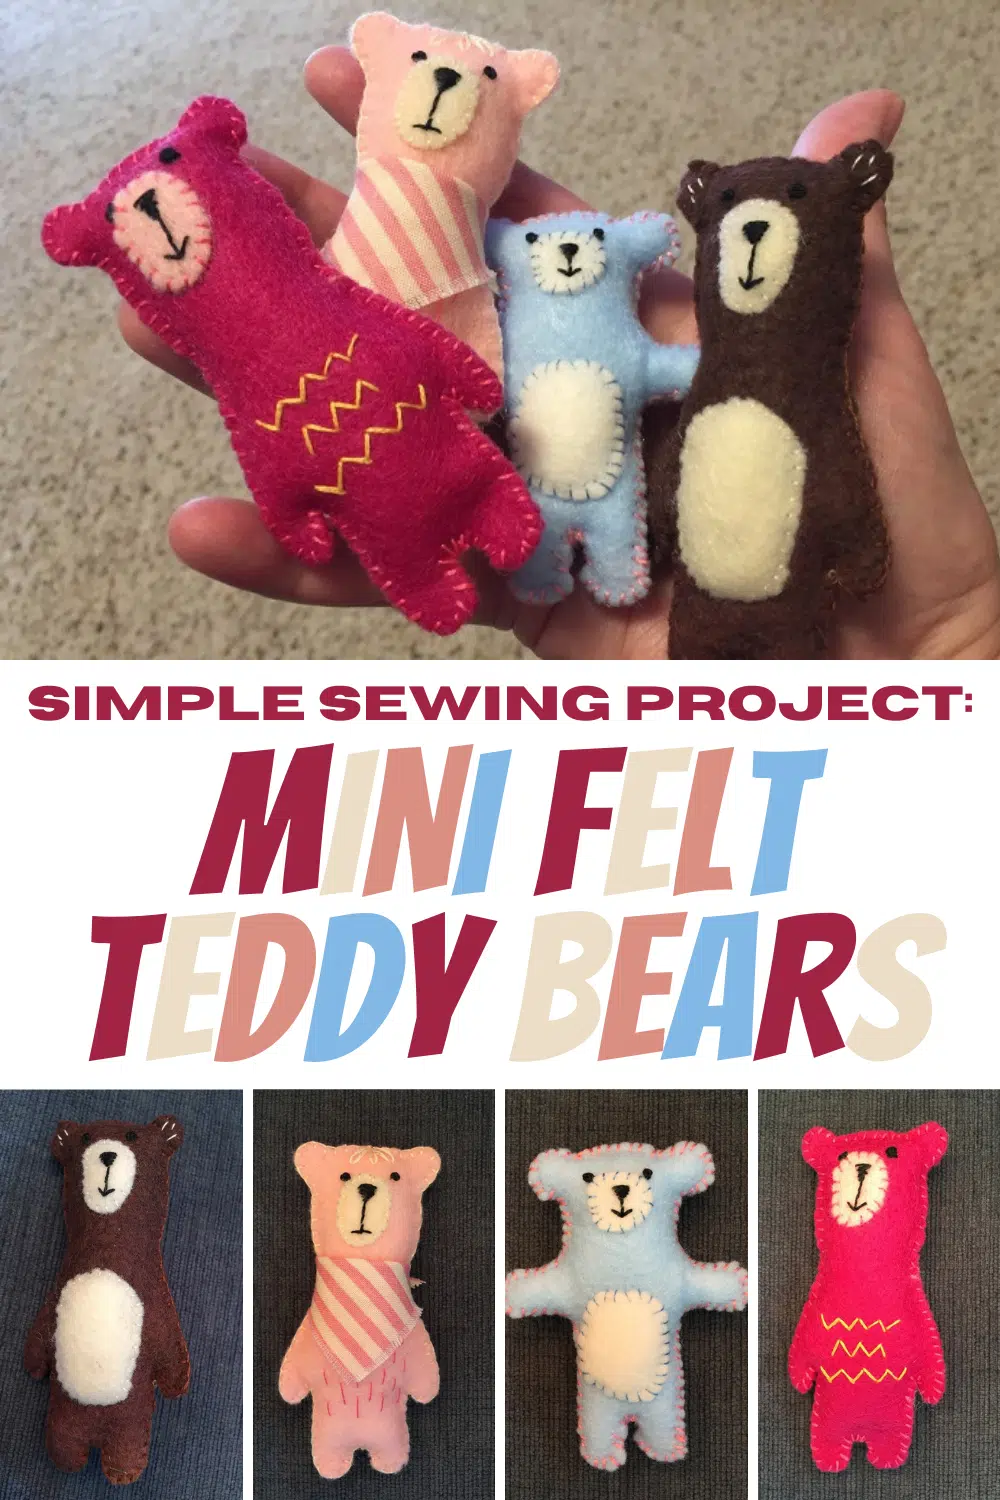 How to Choose the Best Felt for Sewing Projects